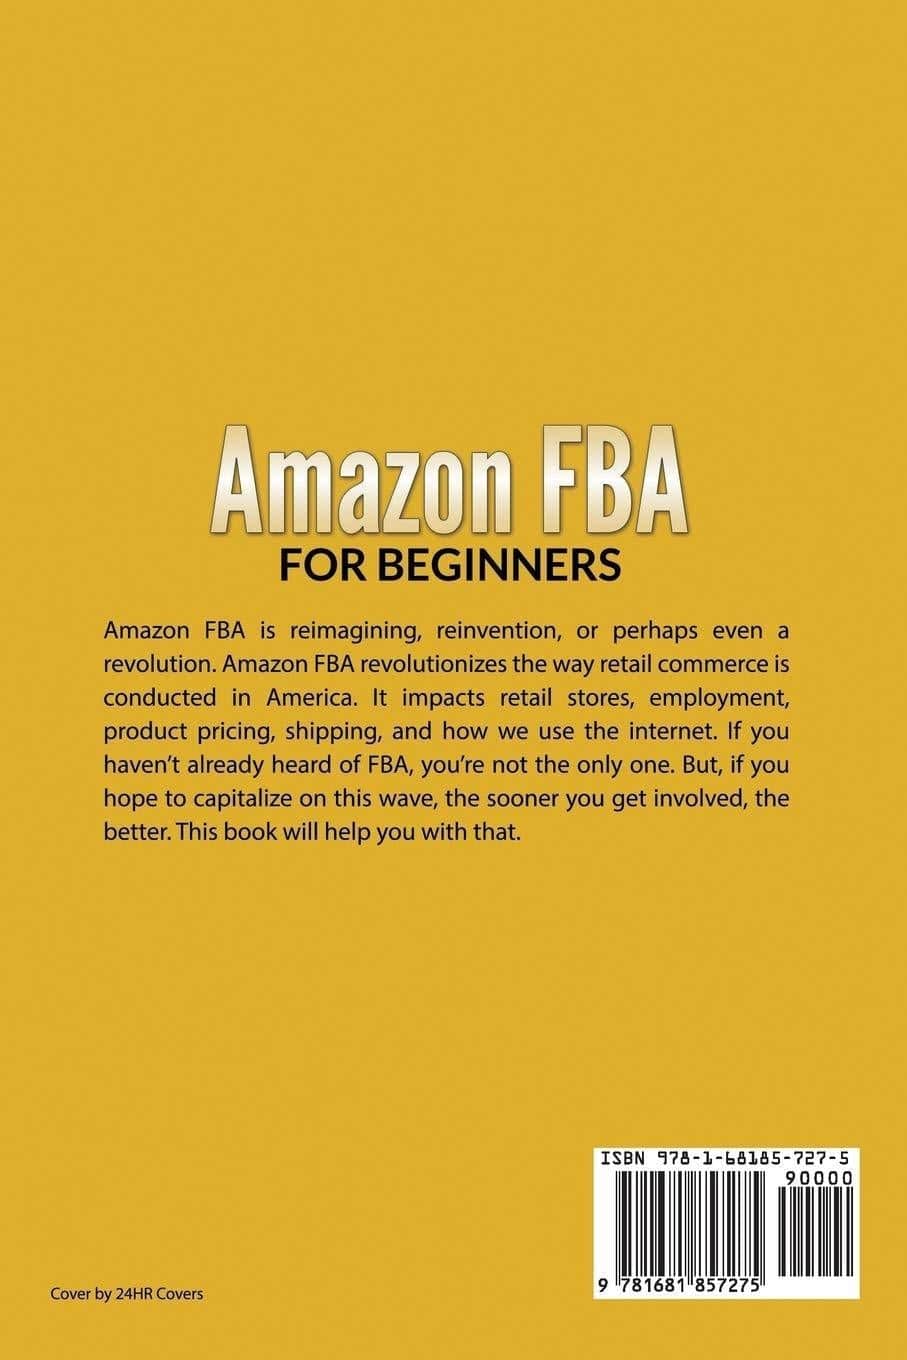 Amazon FBA For Beginners: Best Selling Secrets Guide on How to M - SureShot Books Publishing LLC